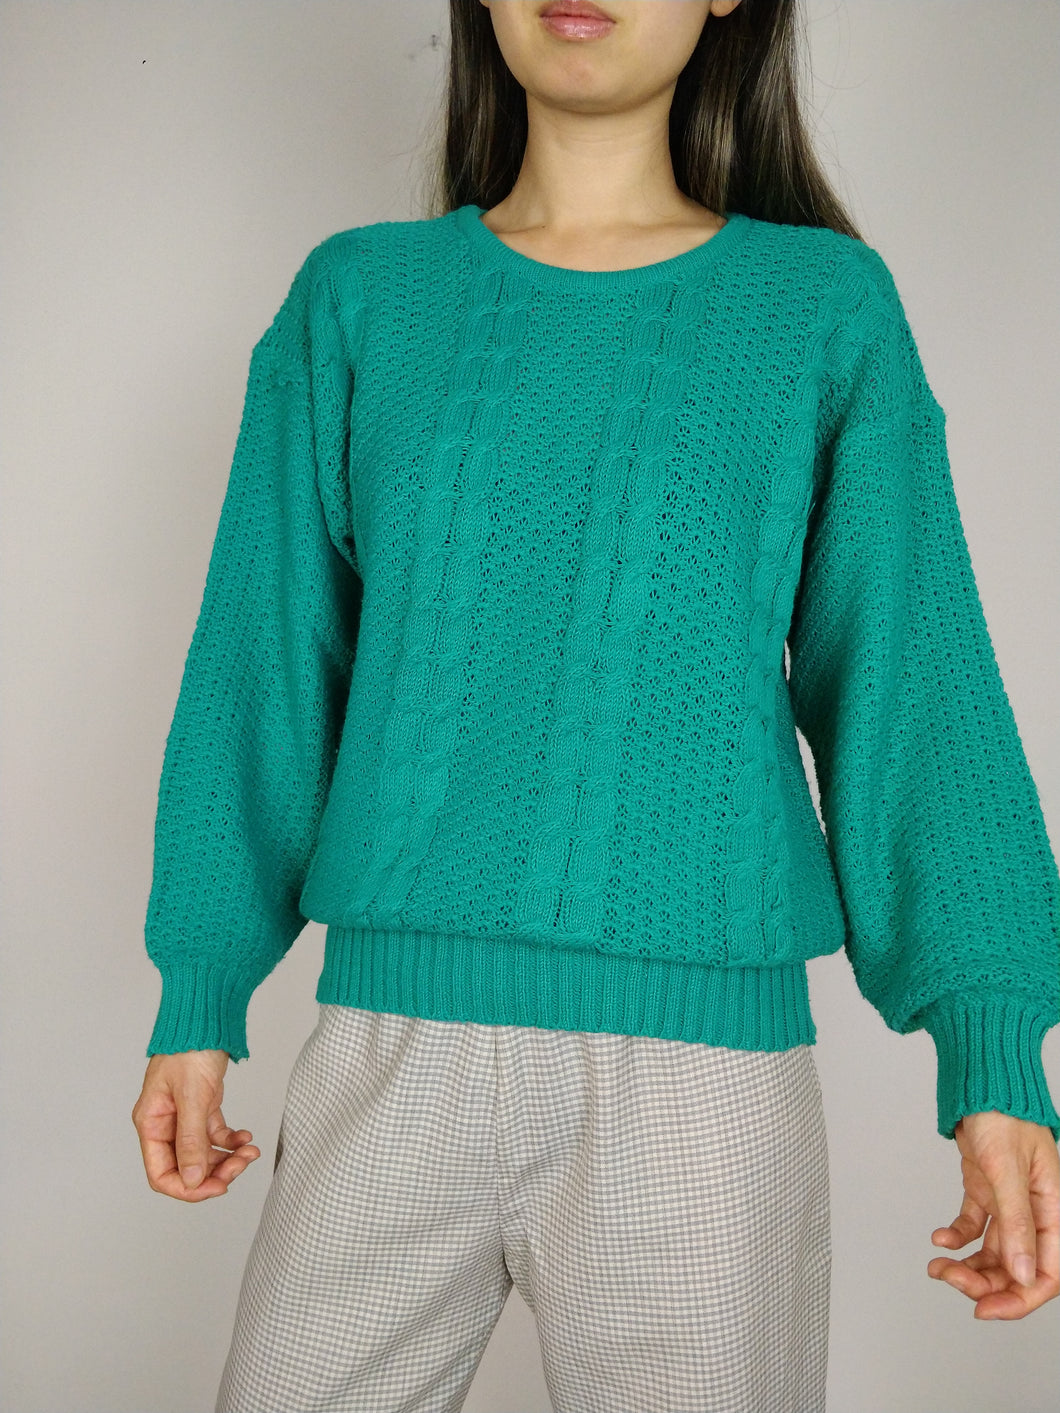 The Green Knit | Vintage sweater knit pullover cable knit pattern turquoise green S-M